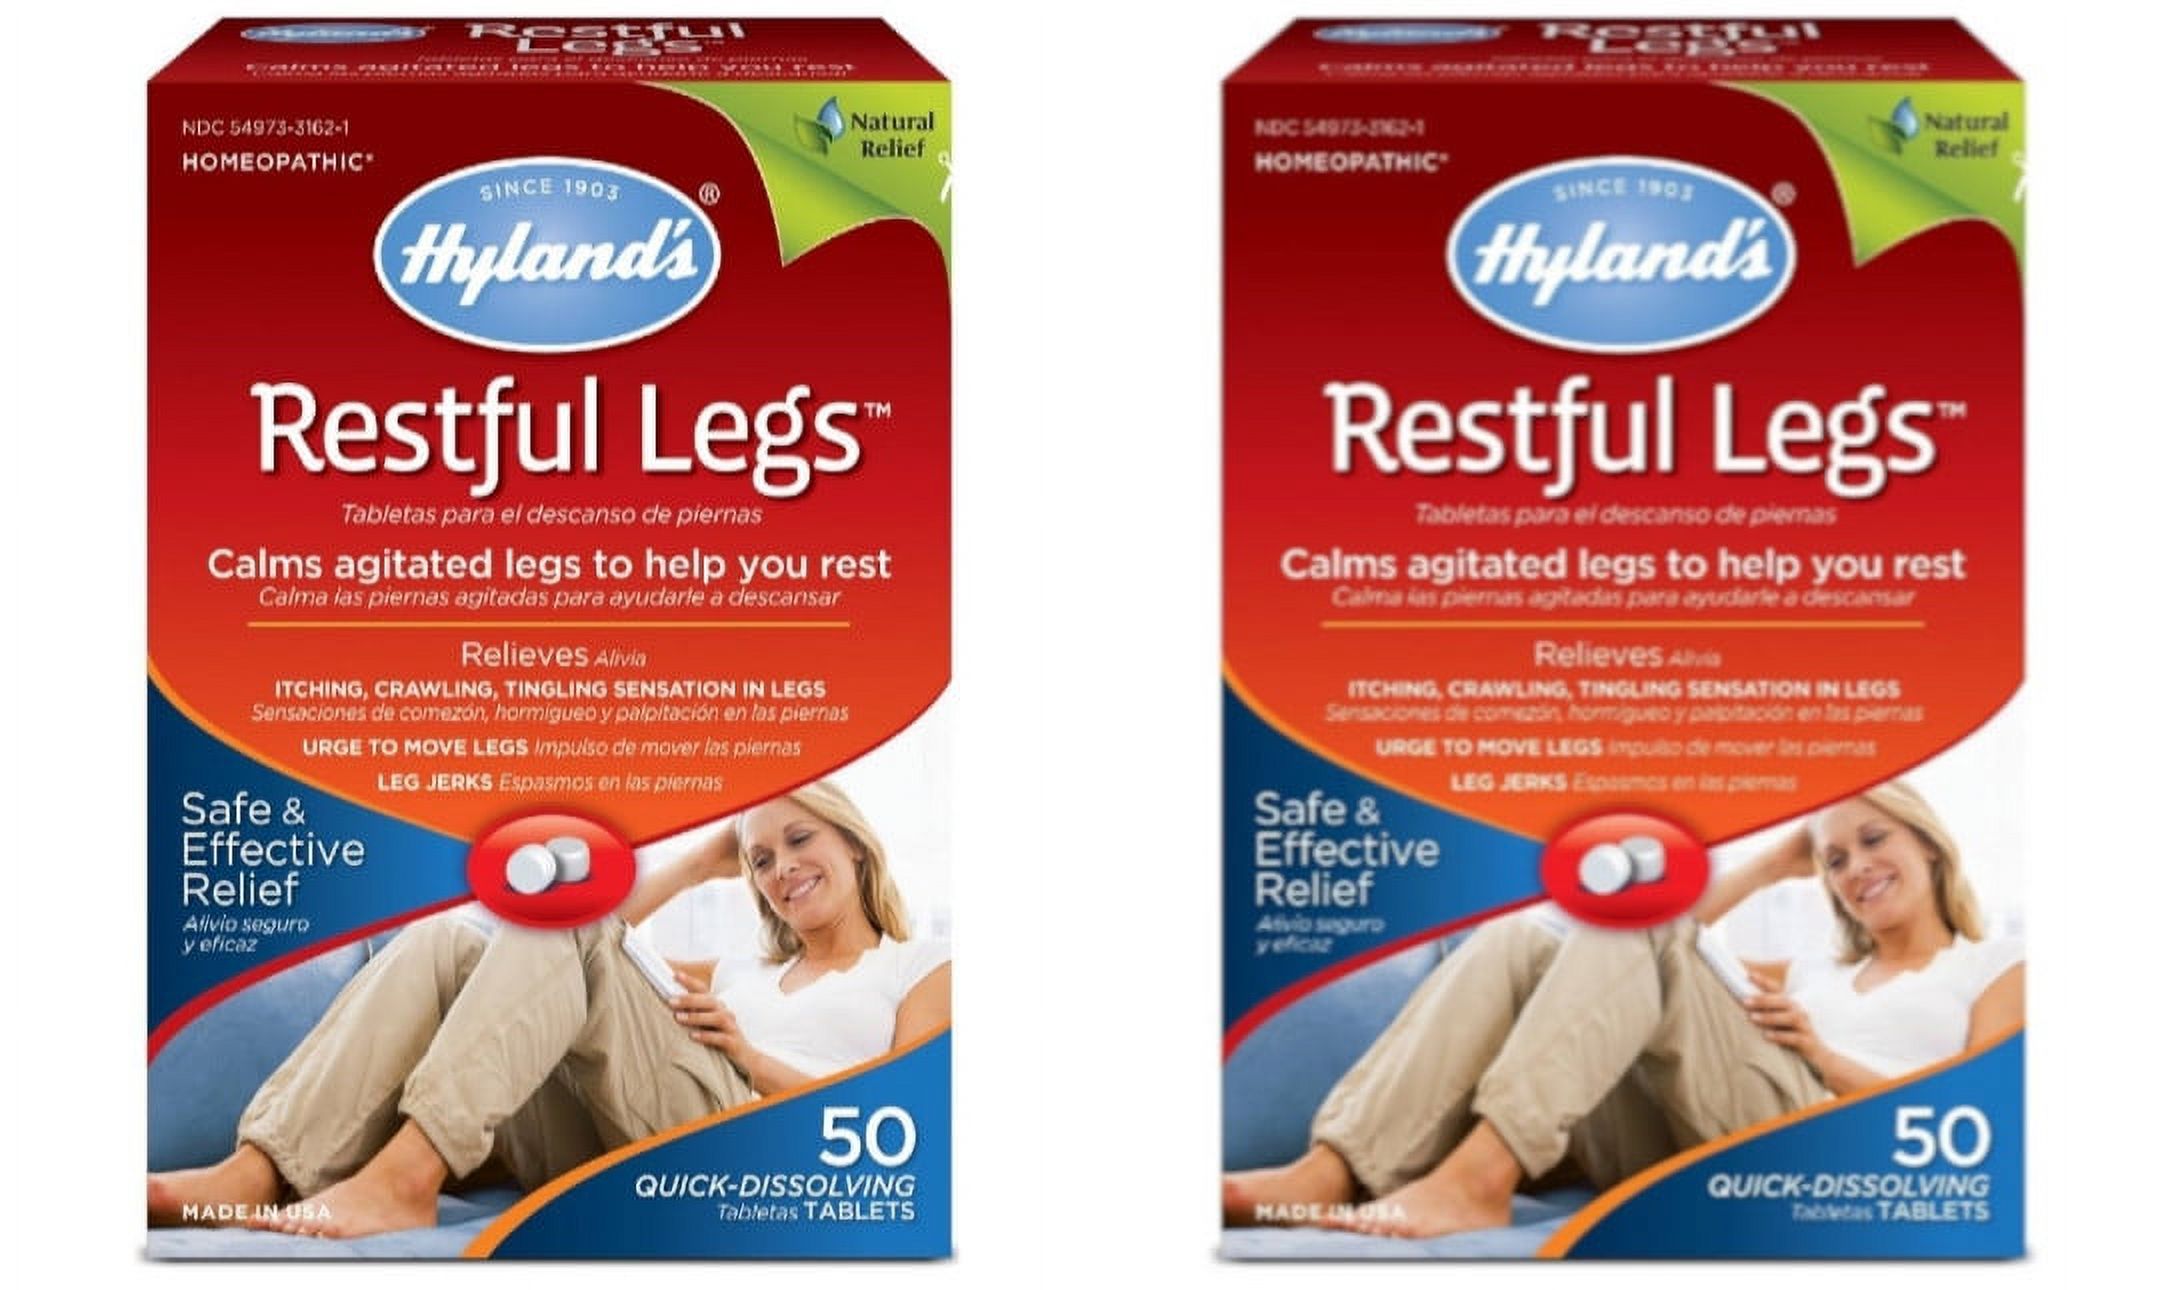 Hylands Restful Legs Safe And Effective Relief Homeopathic Tablets - 50 Ea, 2 Pack - image 1 of 1